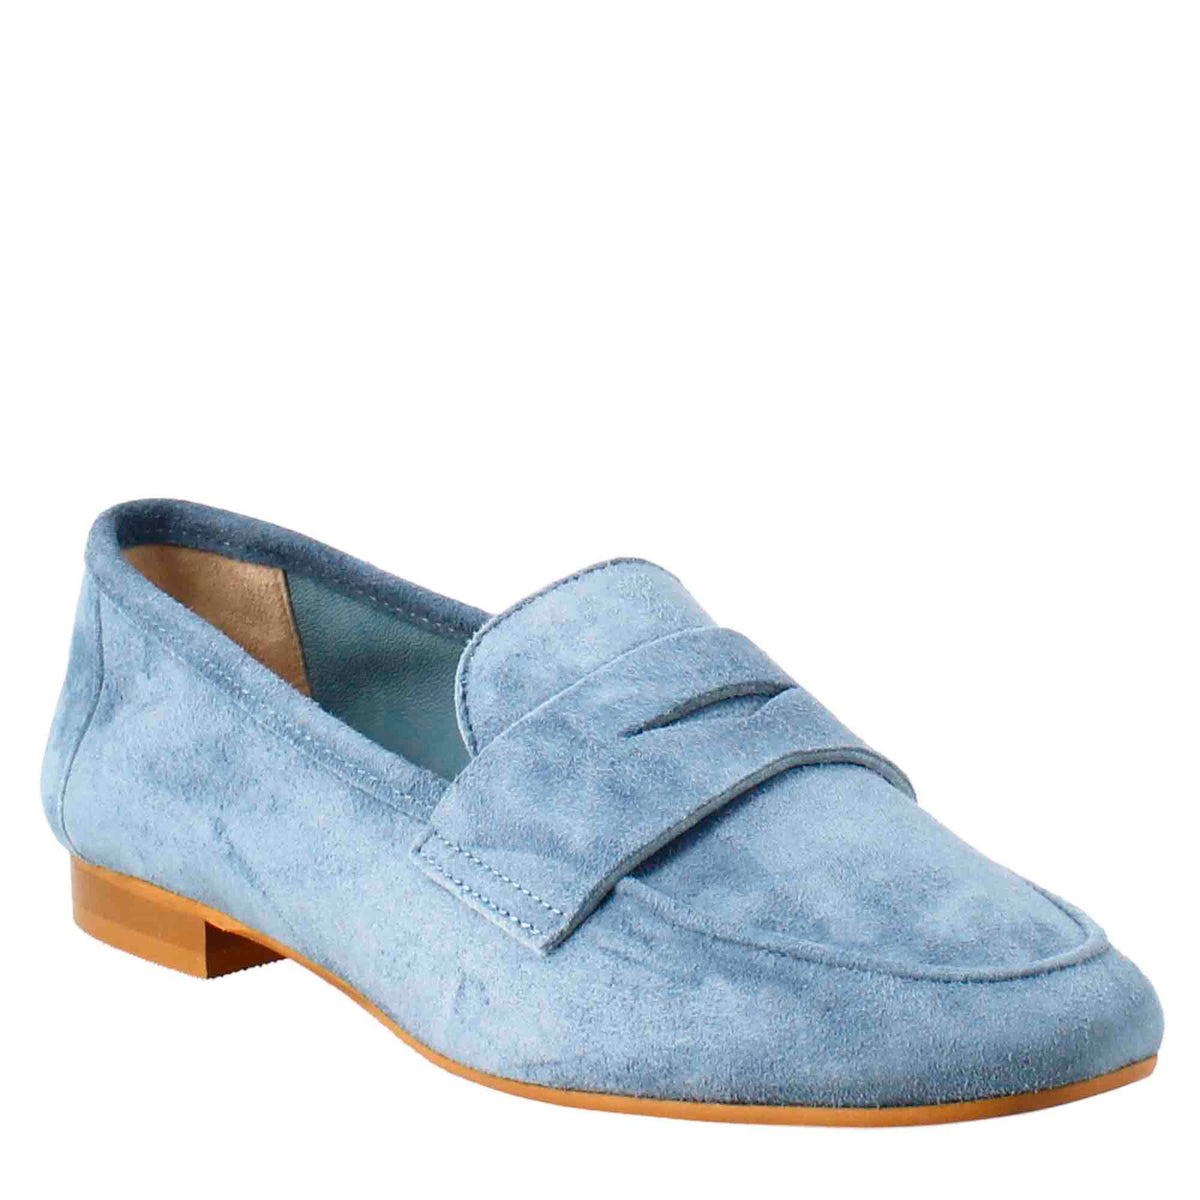 Flexible women's moccasin in light blue suede and rubber sole